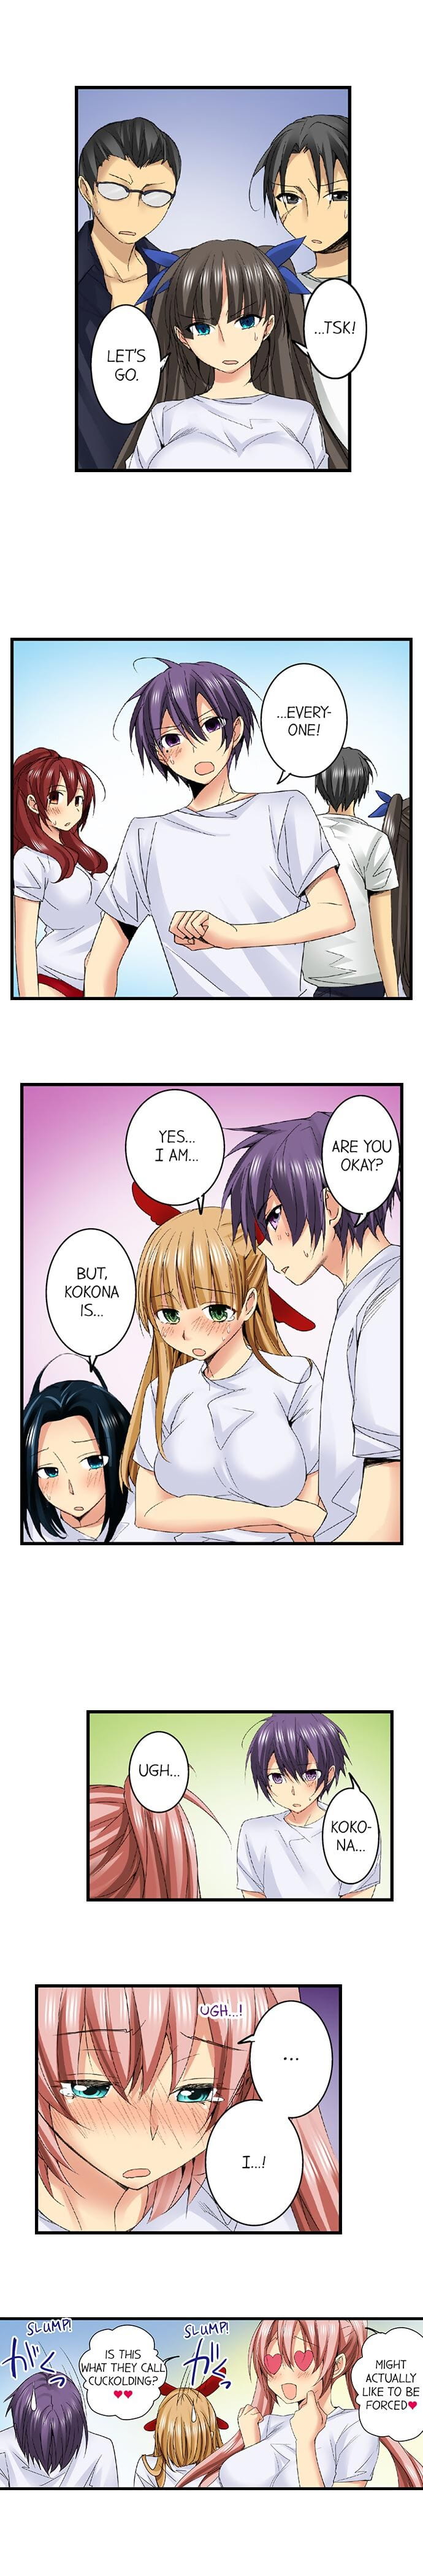 Sneaked Into A Horny Girls School Chapter 31 - 36 - part 2 page 1